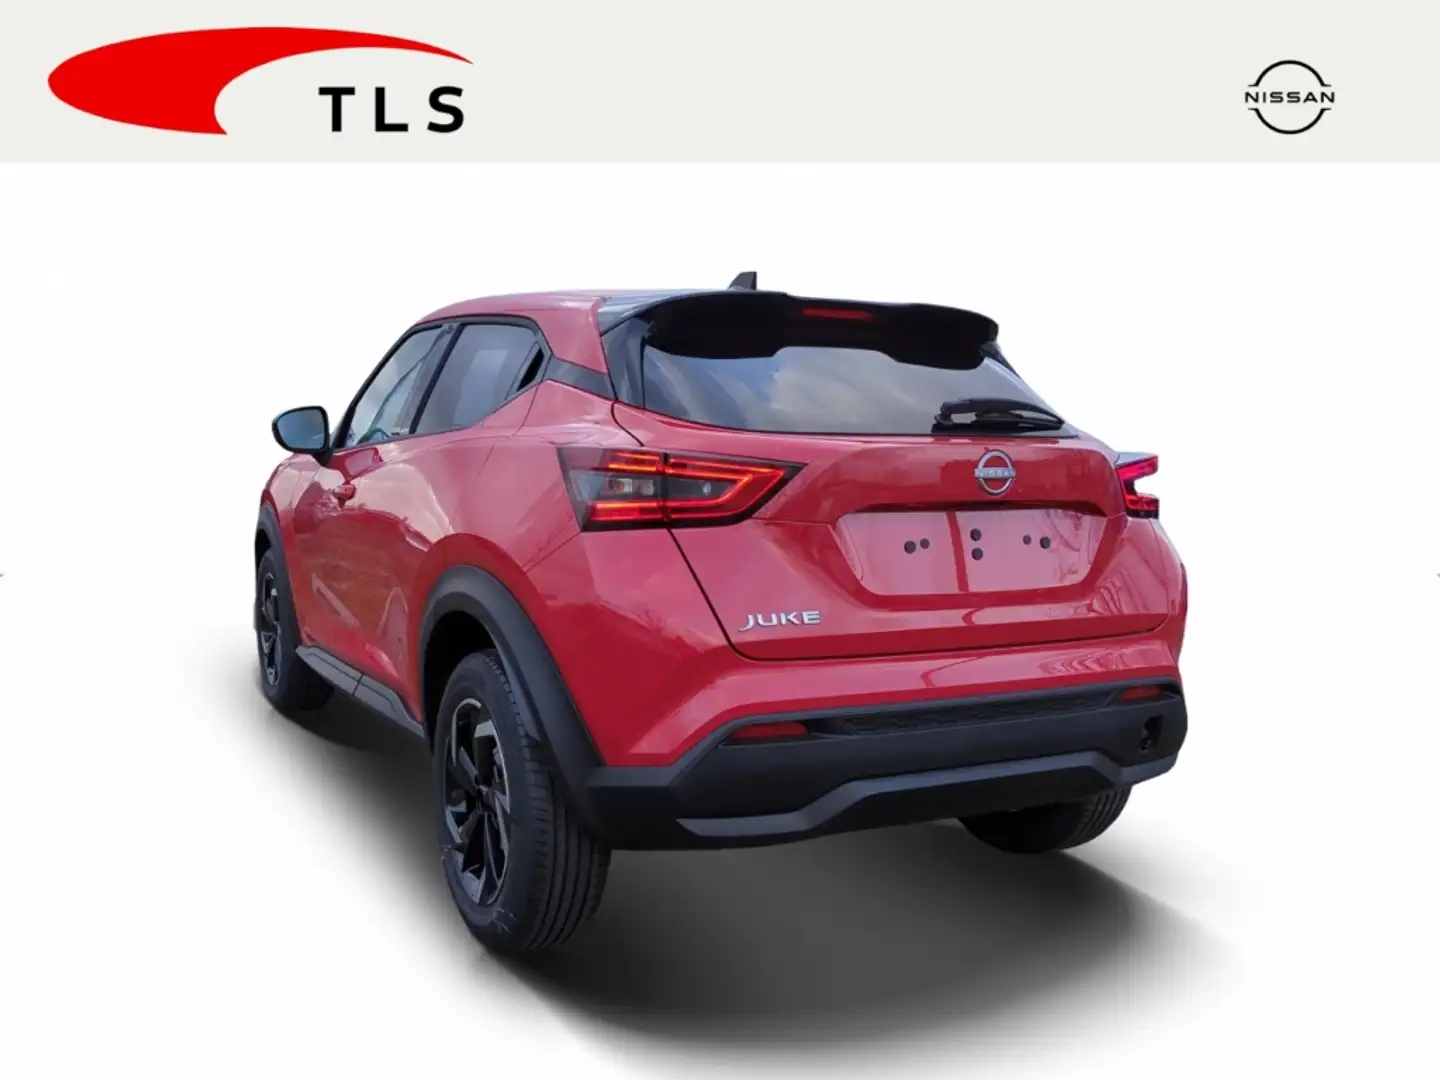 Nissan Juke N-STYLE - 1.0 DIG-T - 114PS - SOLID RED Rosso - 2